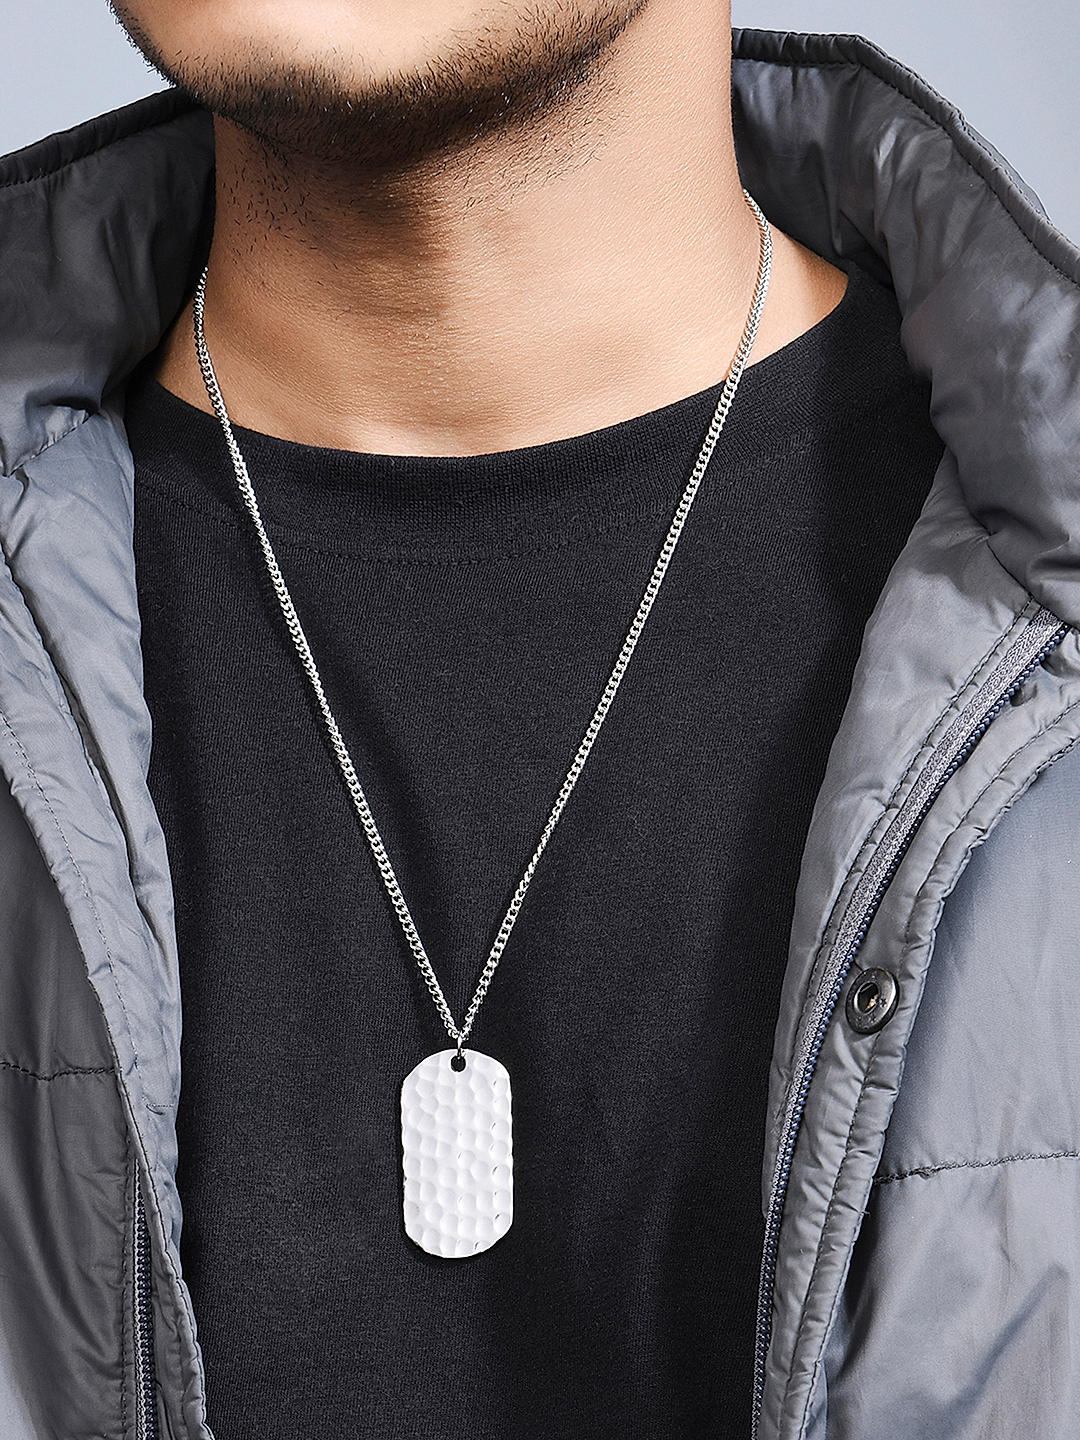 Mens Polished Stainless steel Army Dog Tag Pendant Necklace Oval Chain 24''  | eBay